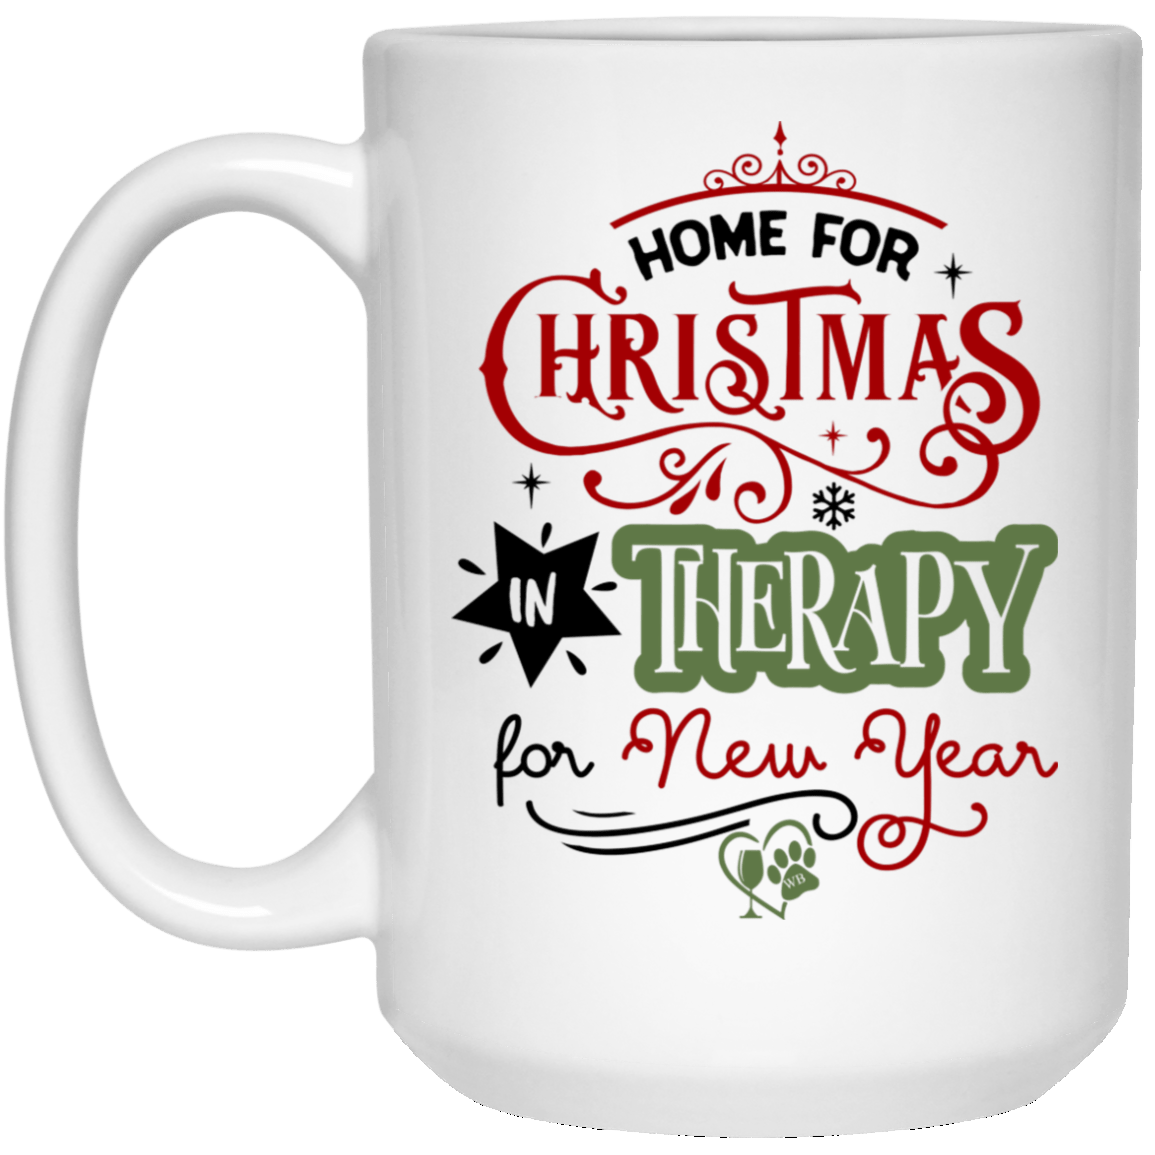 Drinkware White / One Size Winey Bitches Co ' Home For Christmas, In Therapy on New Years" 15 oz. White Mug WineyBitchesCo